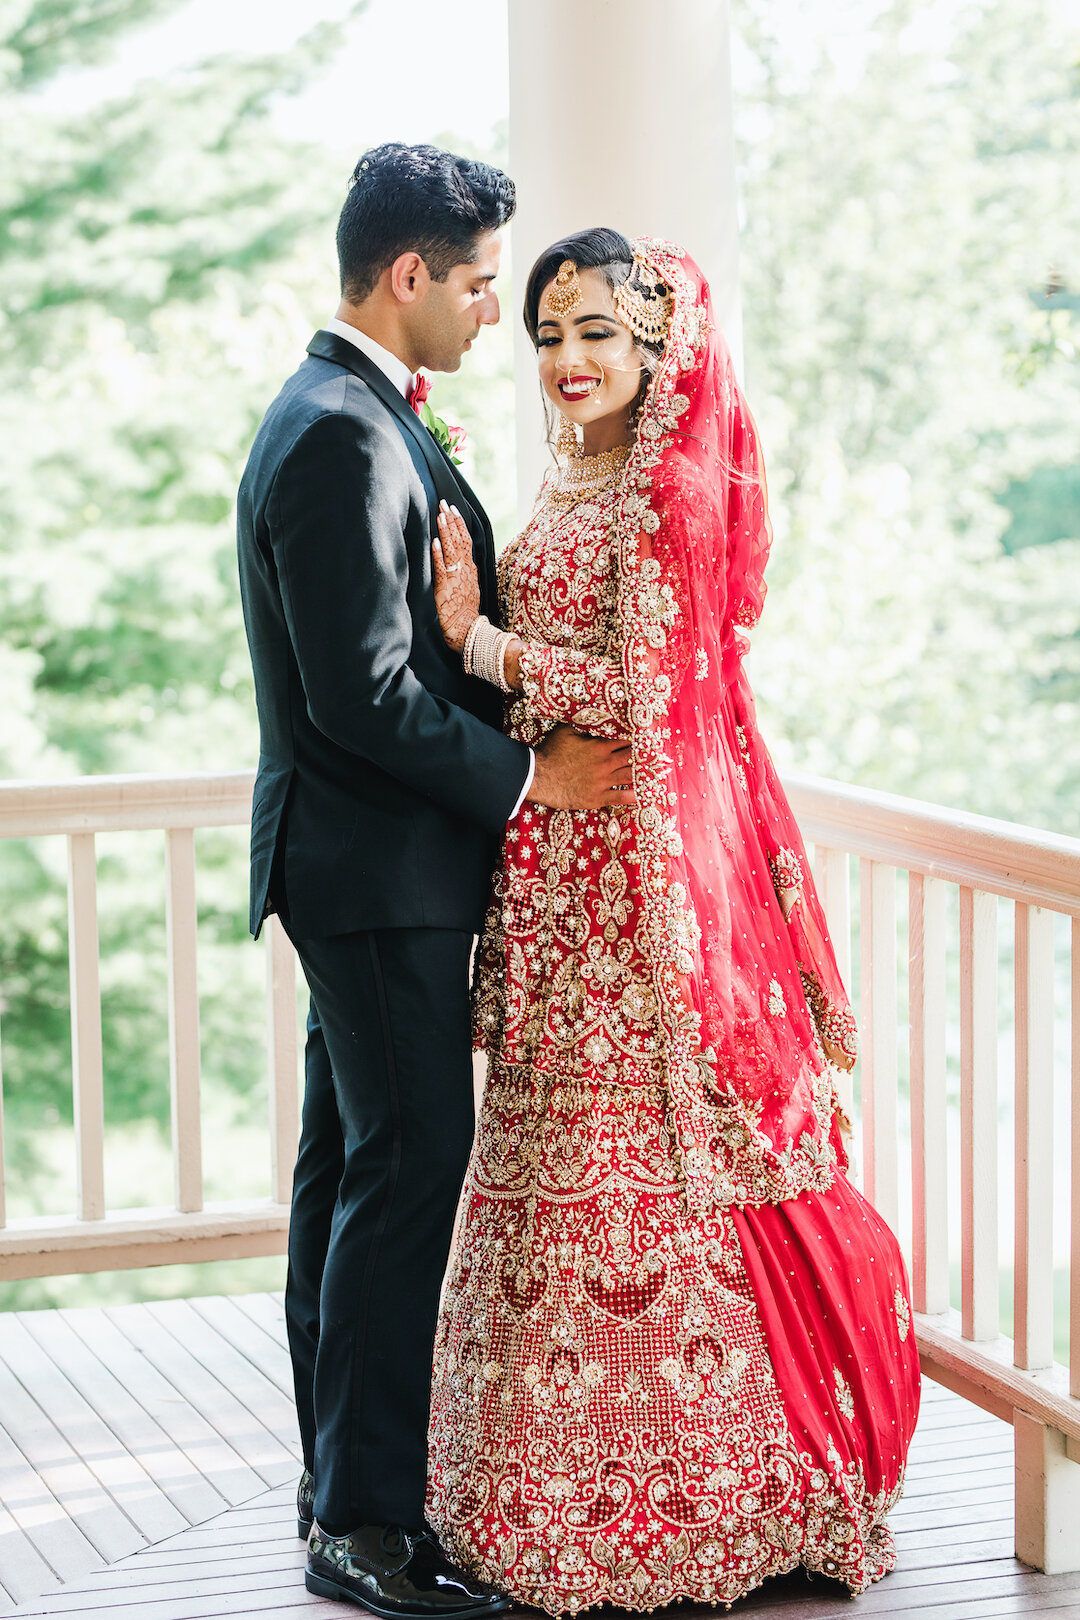 Romantic Wedding with the Blending of Two Cultures featured on CHI thee WED